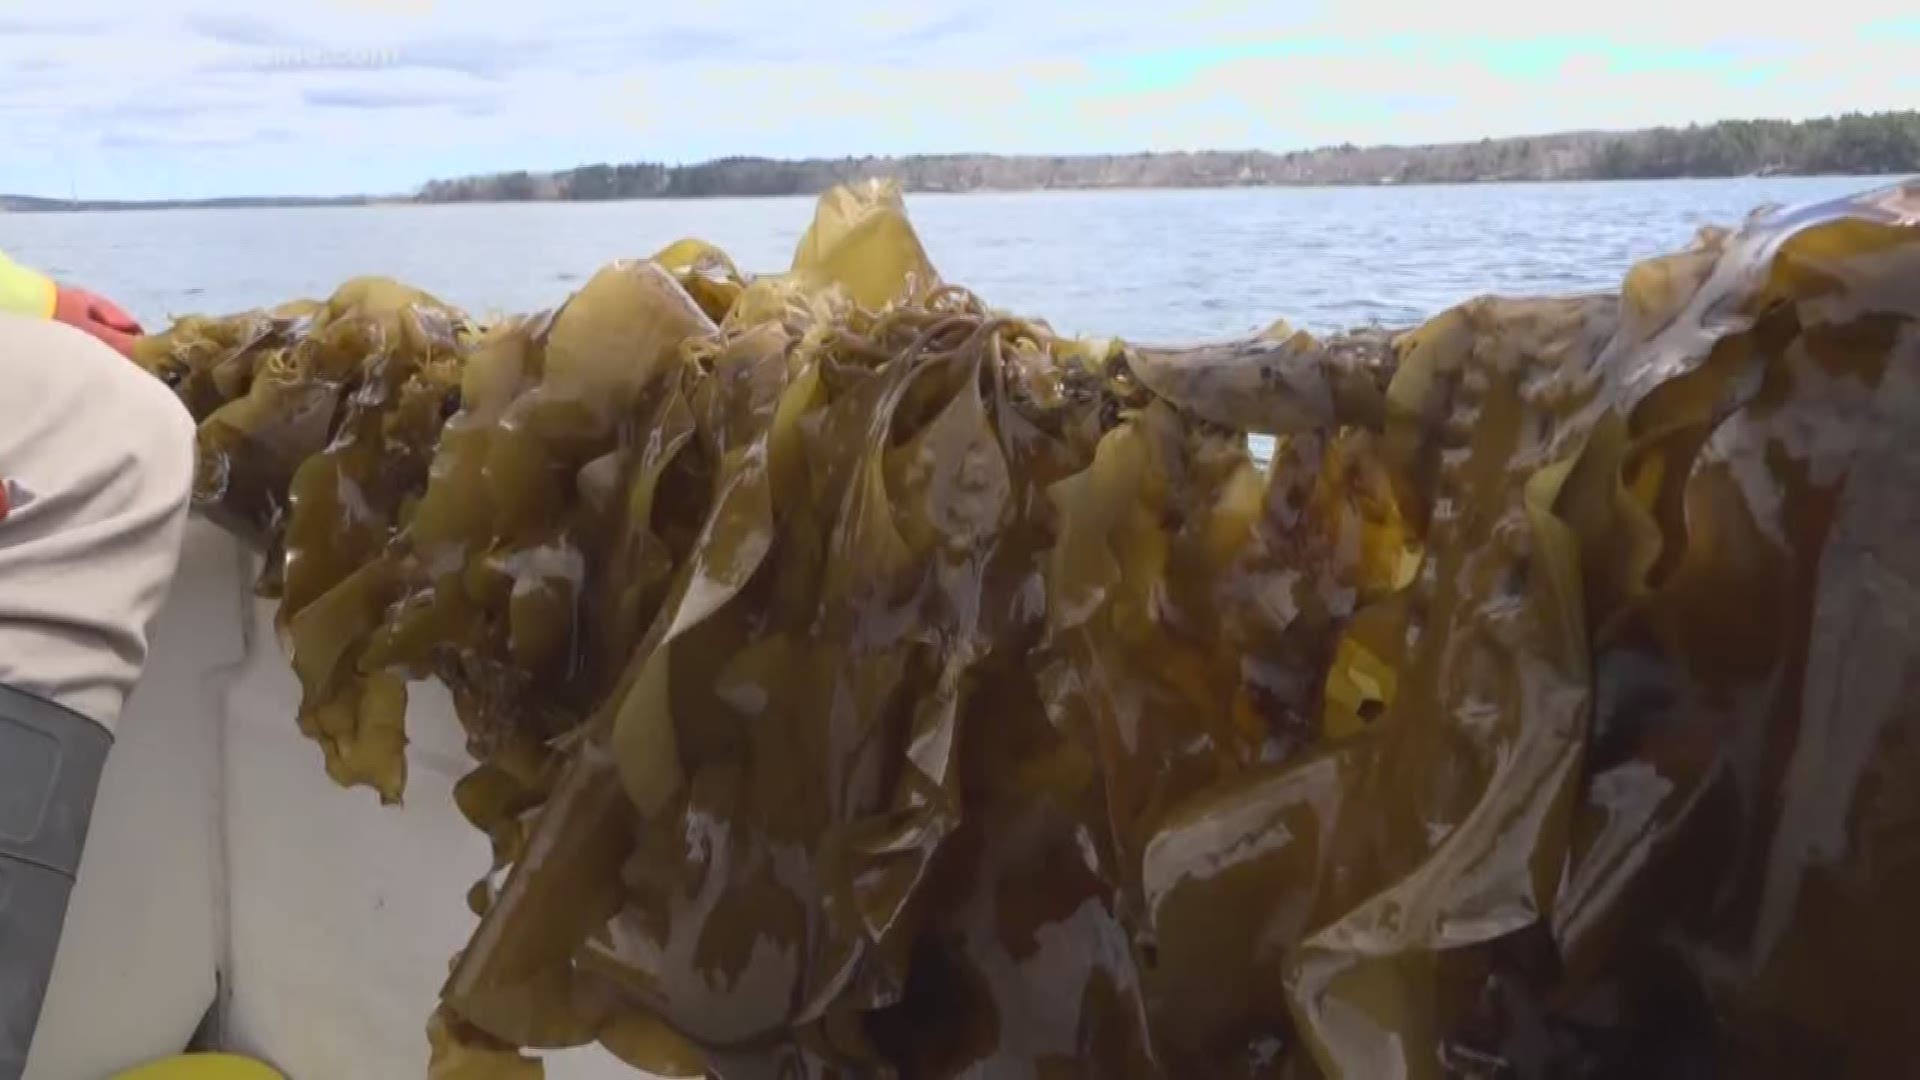 A sustainable resource from the ocean could be used to replace plastic. A seaweed farm will make alginate, which works like fiber or yarn.